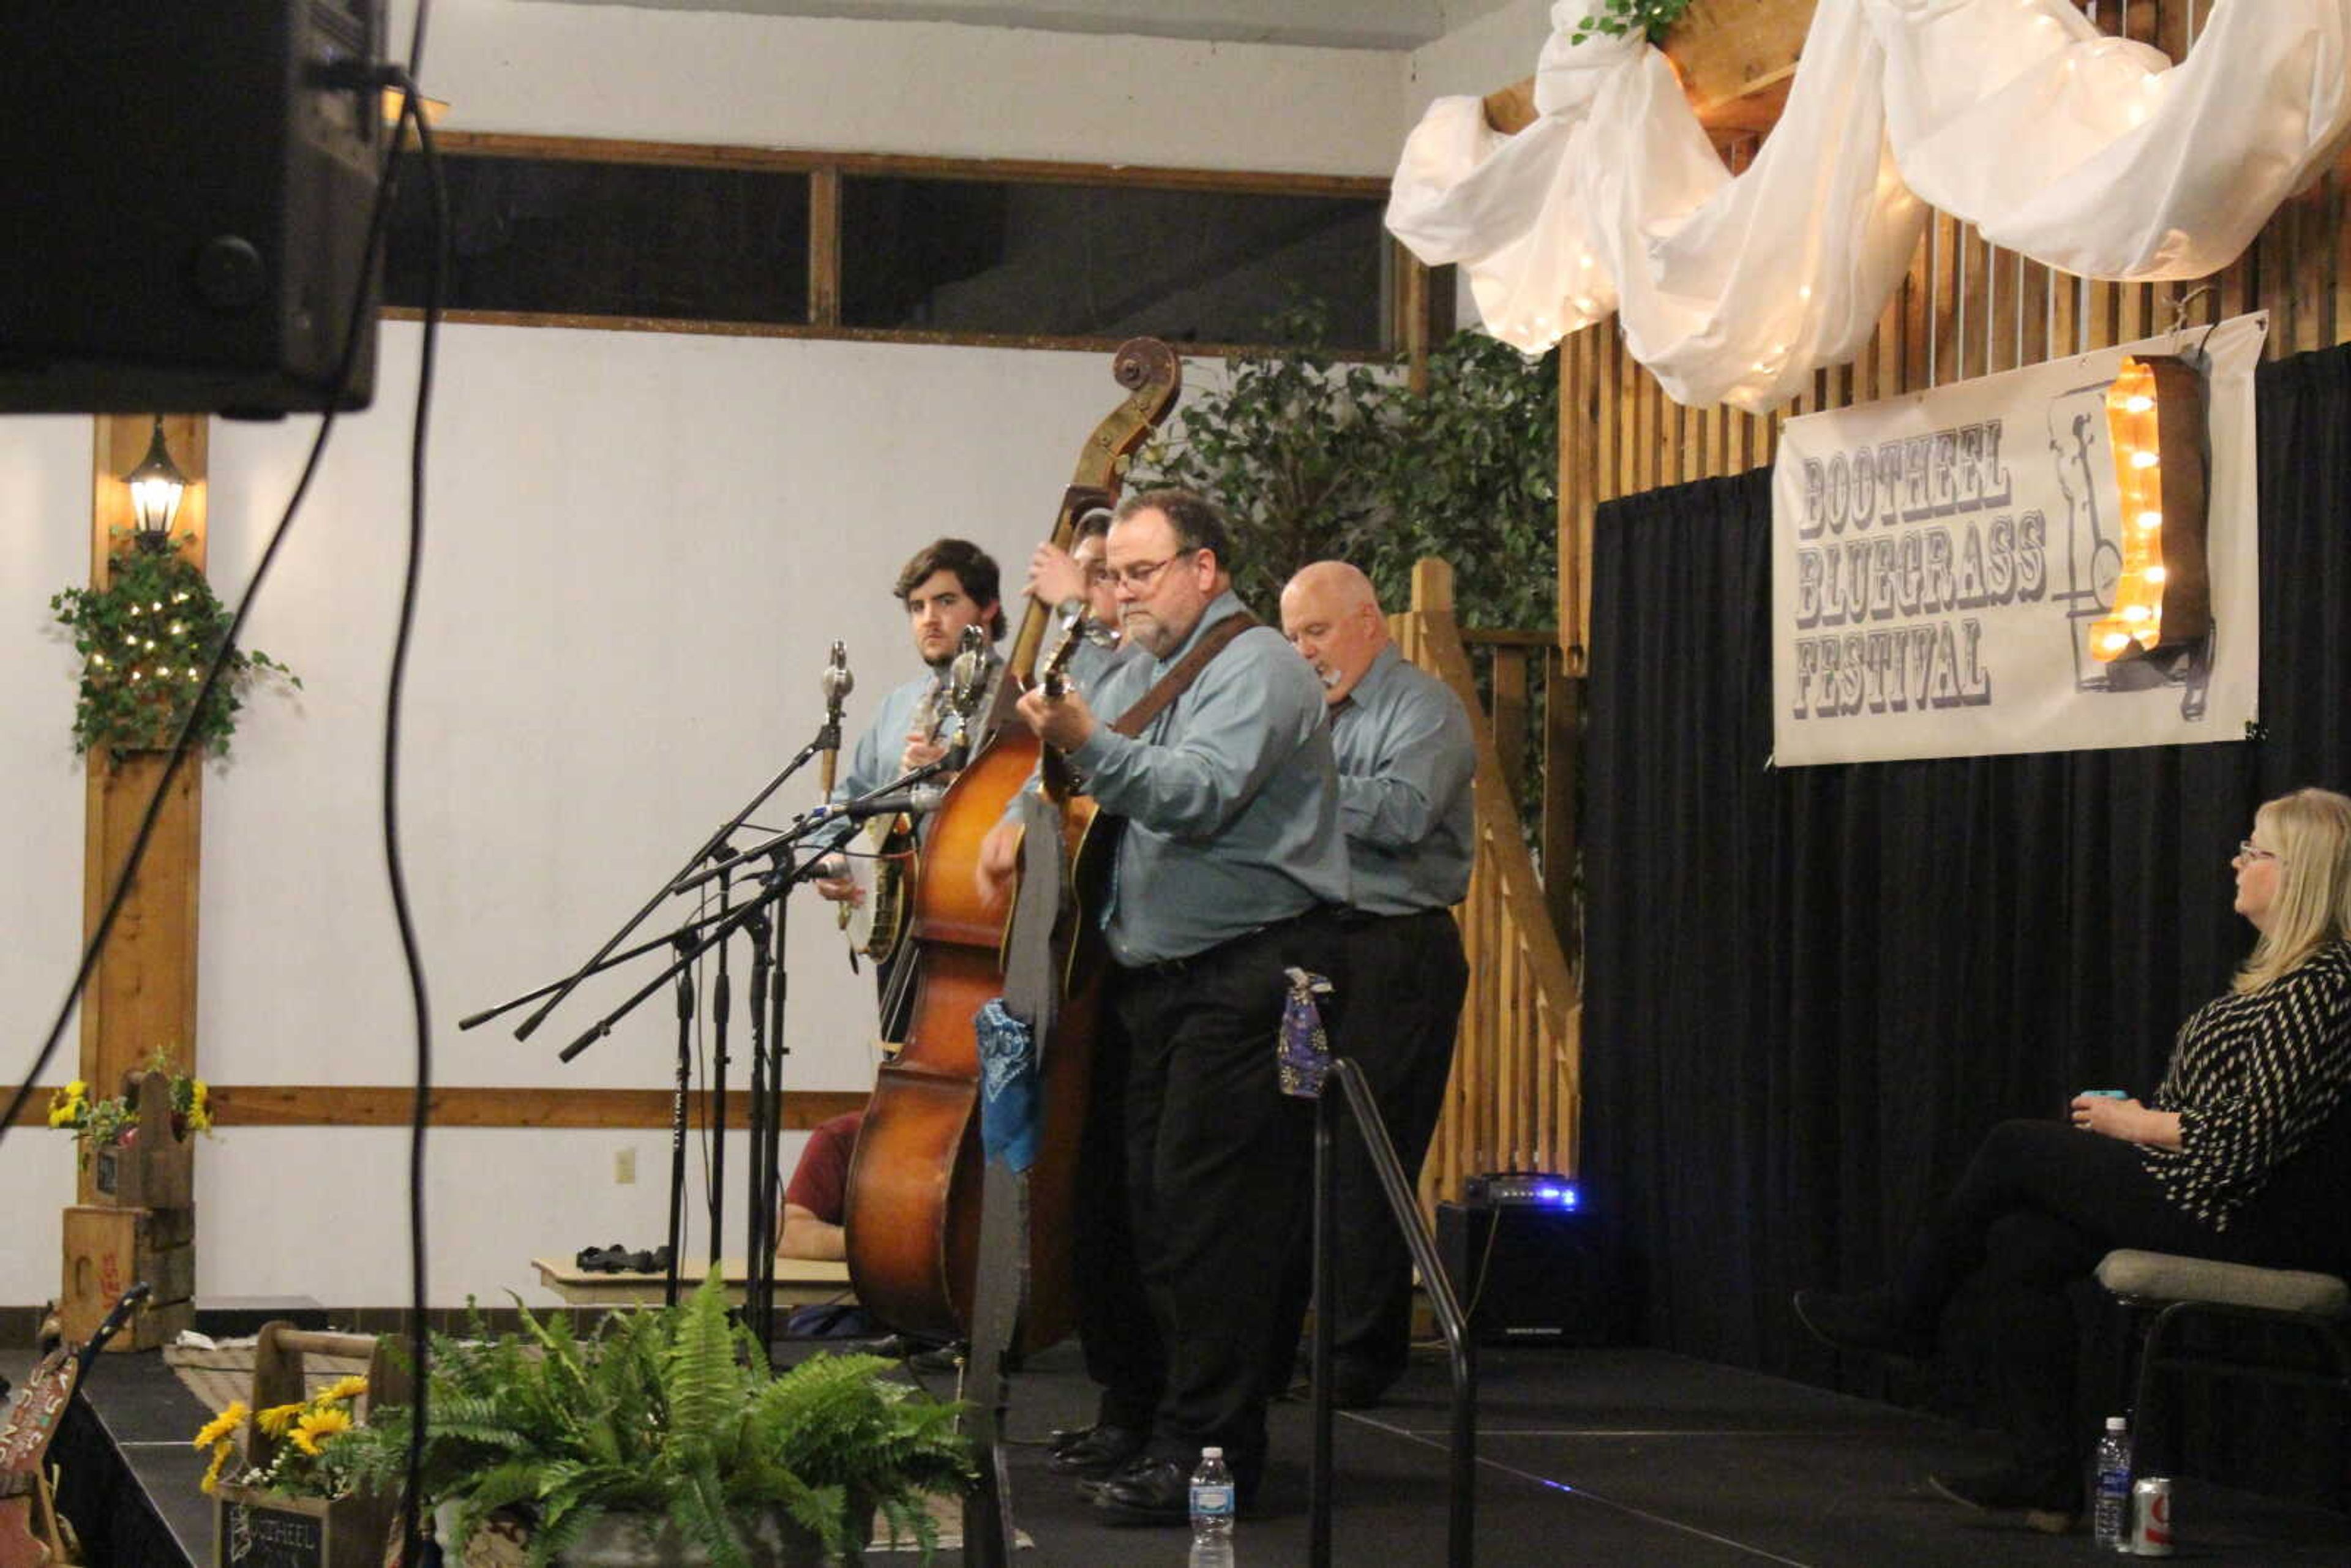 Bulll Hurman and Bull's Eye perform at the Bootheel Bluegrass Festival at the Bavarian Halle in Jackson Jan. 27.